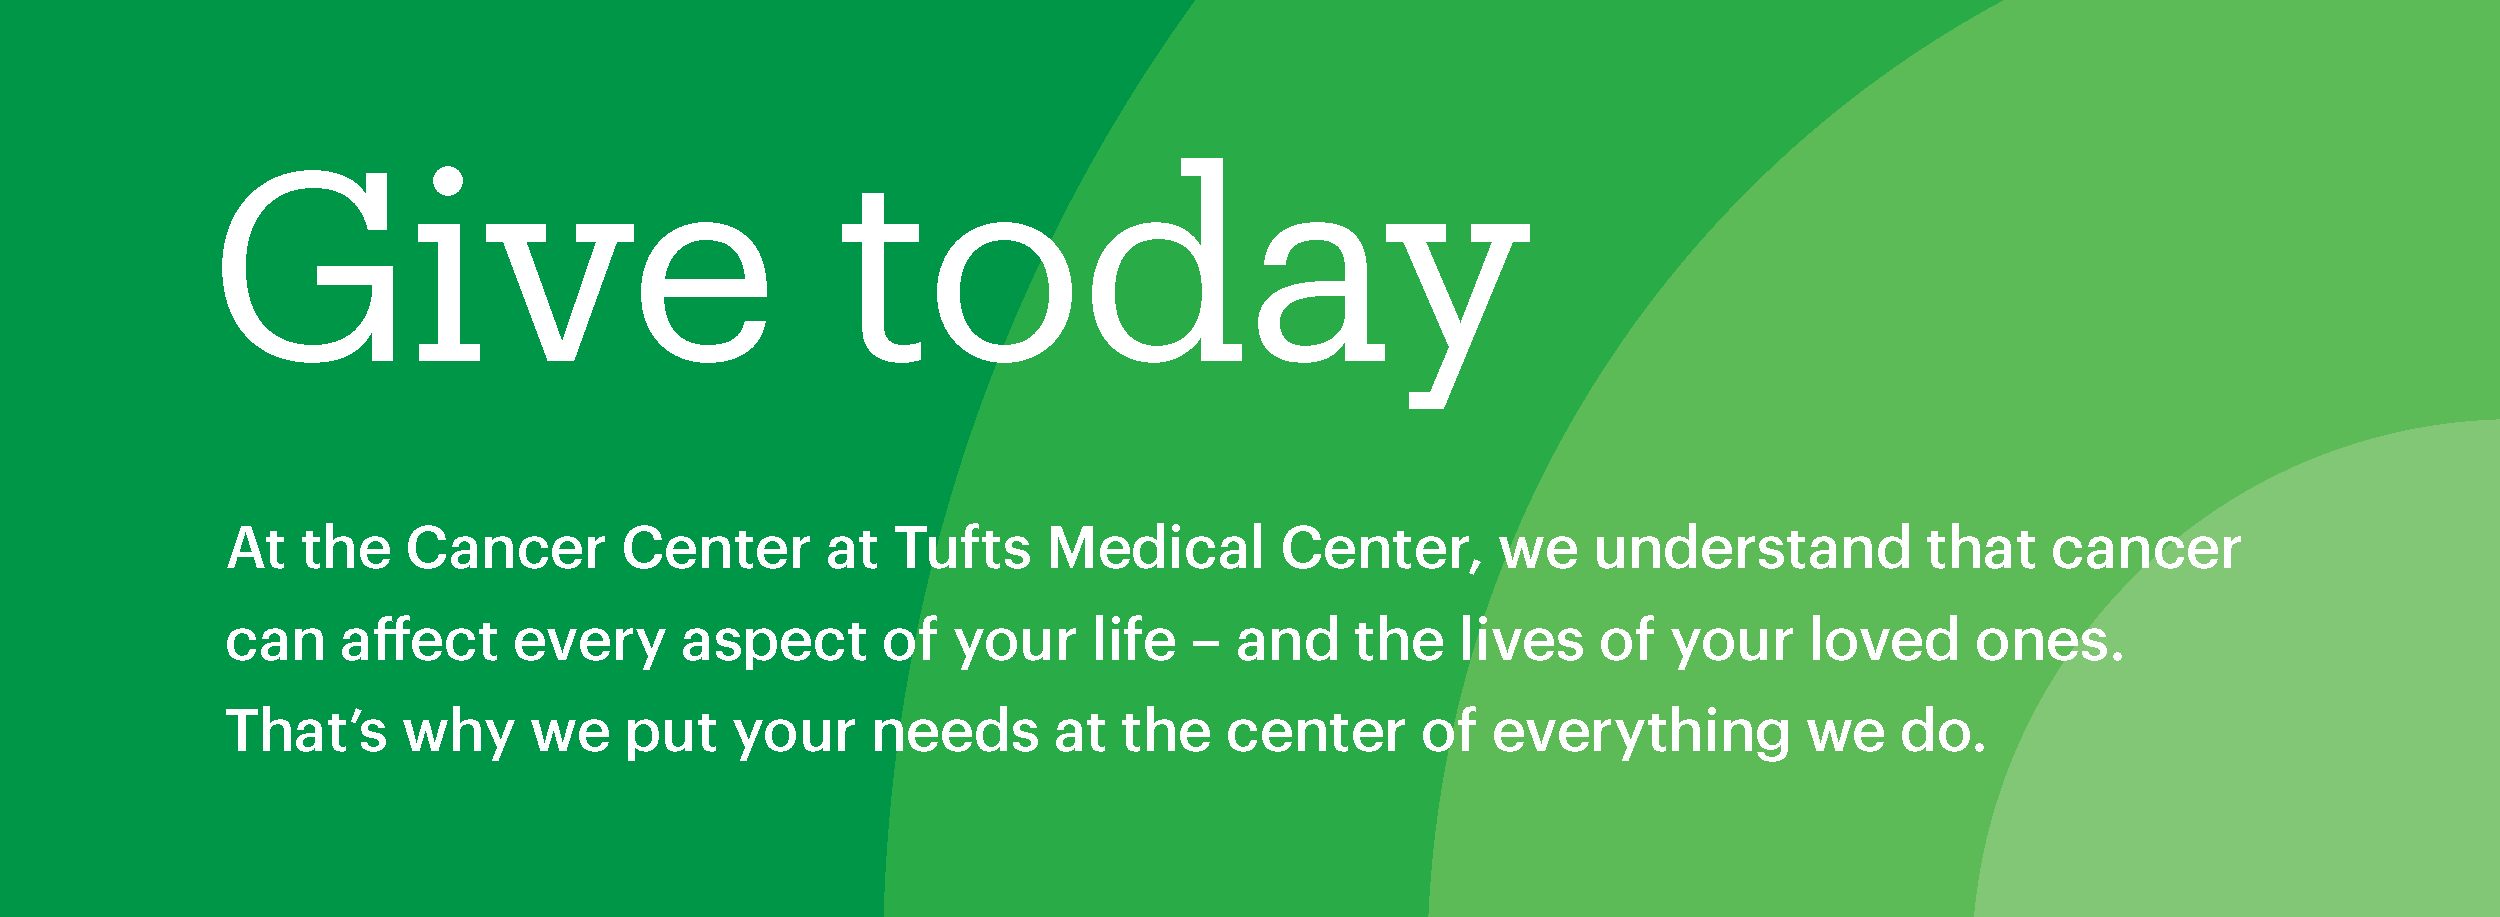 Support the Tufts Medical Center Cancer Center